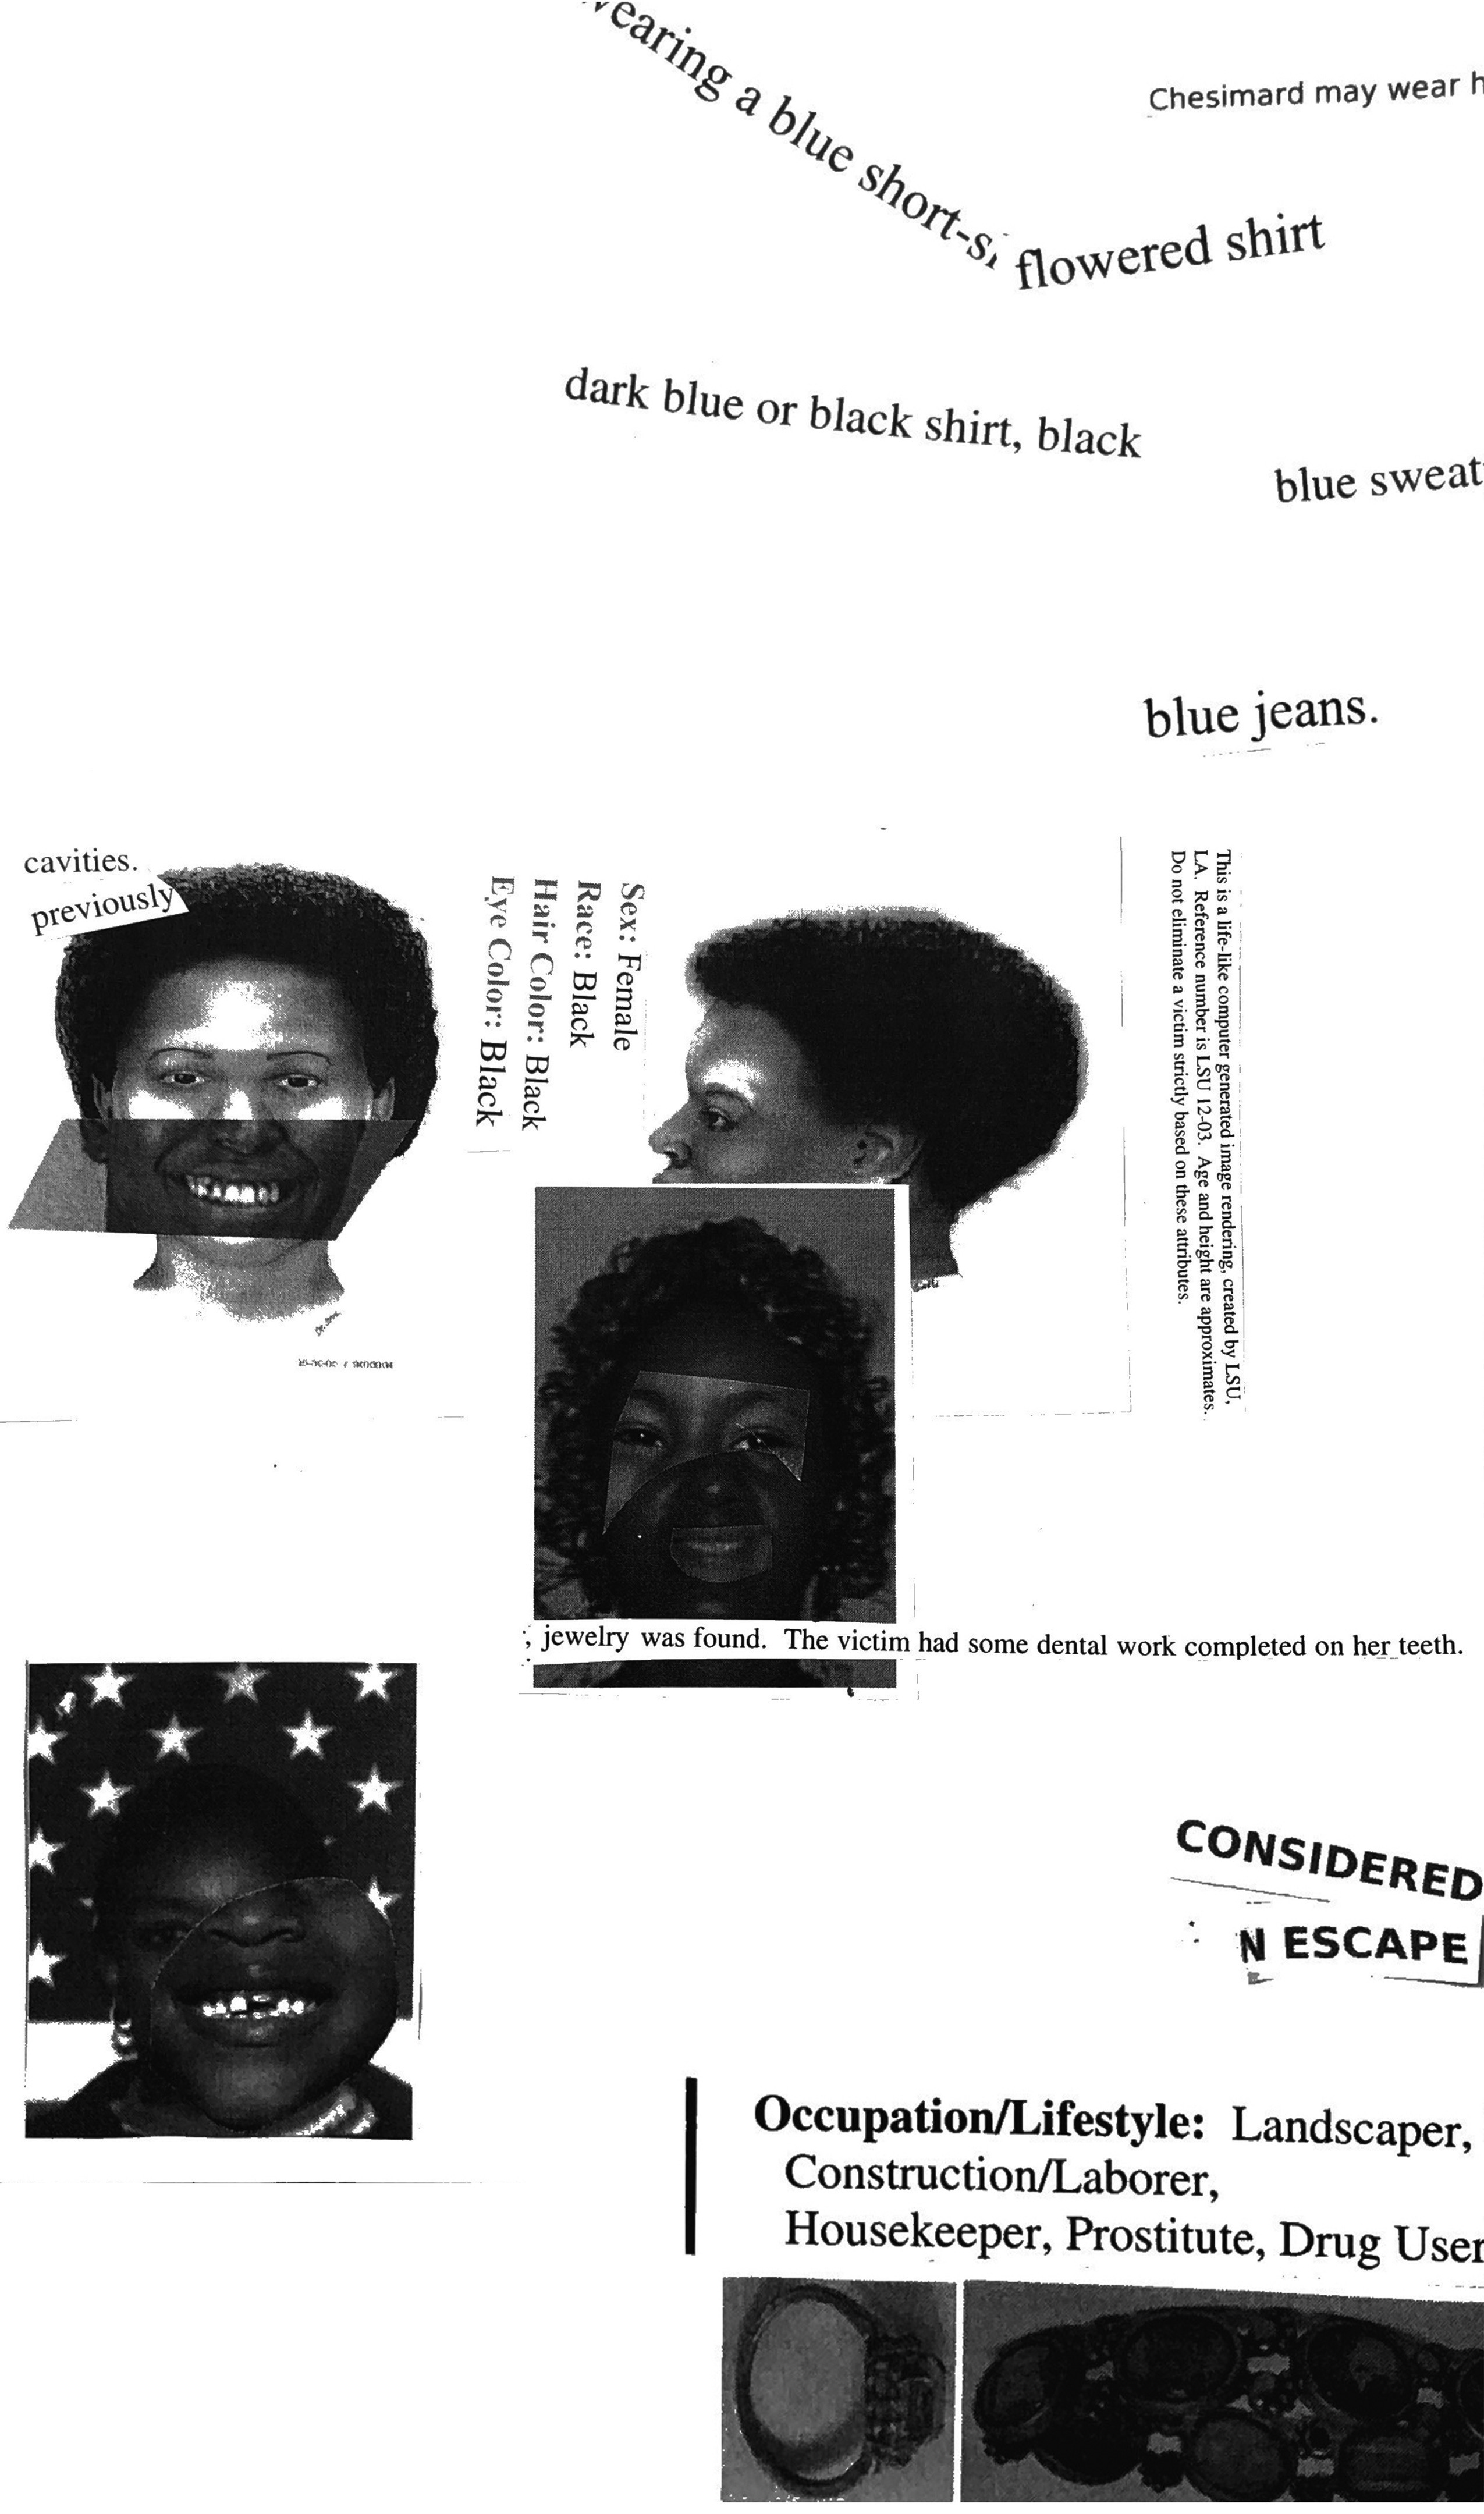 Collage composed of black and white text descriptions and photographs of Black women and girls found on police missing flyers and the FBI’s Most Wanted list.